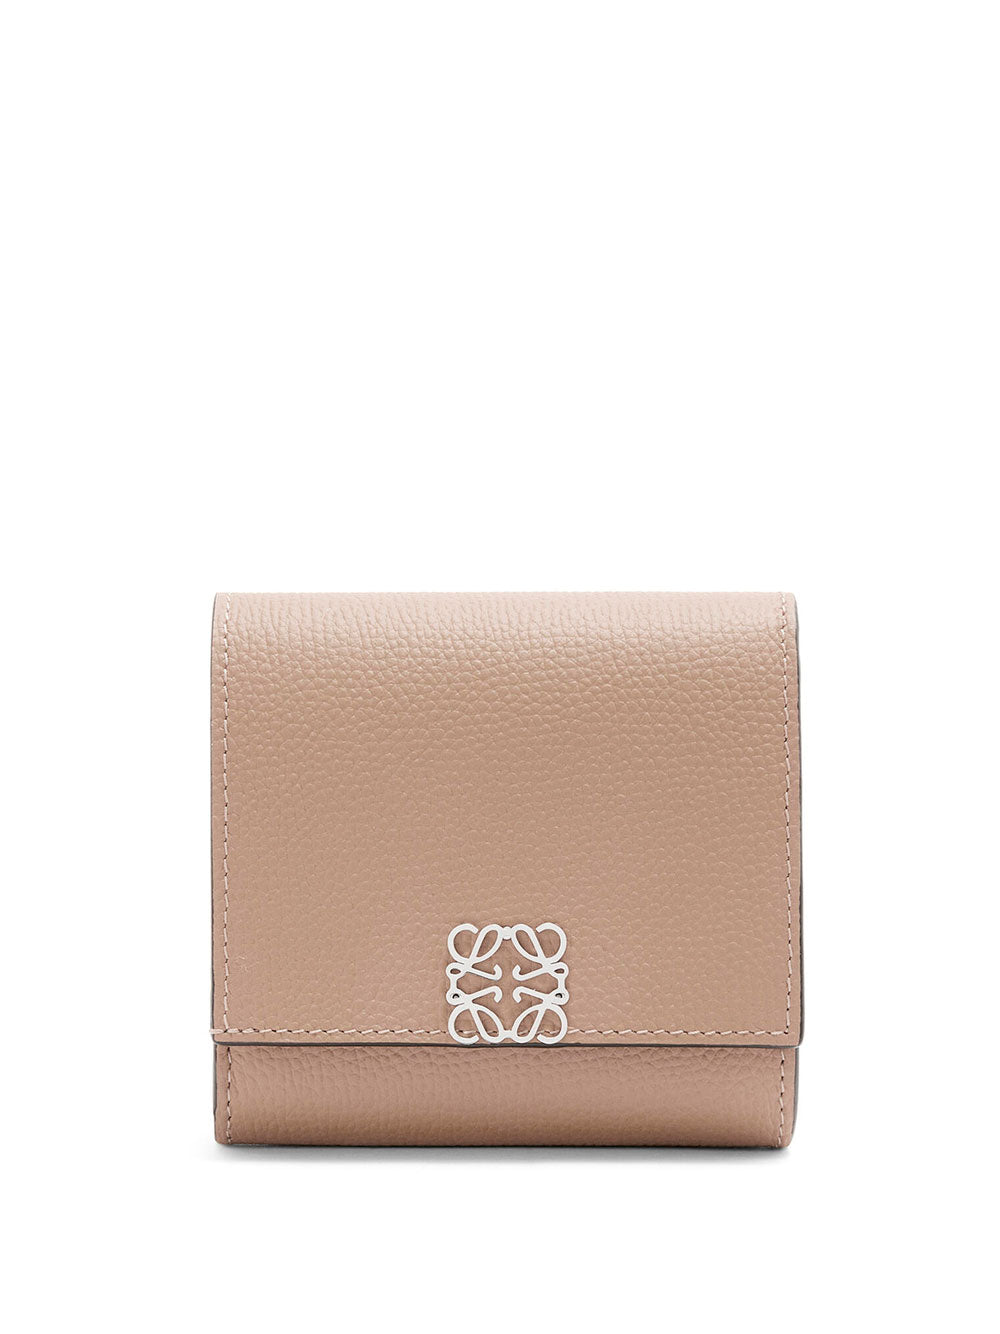 Anagram compact flap wallet